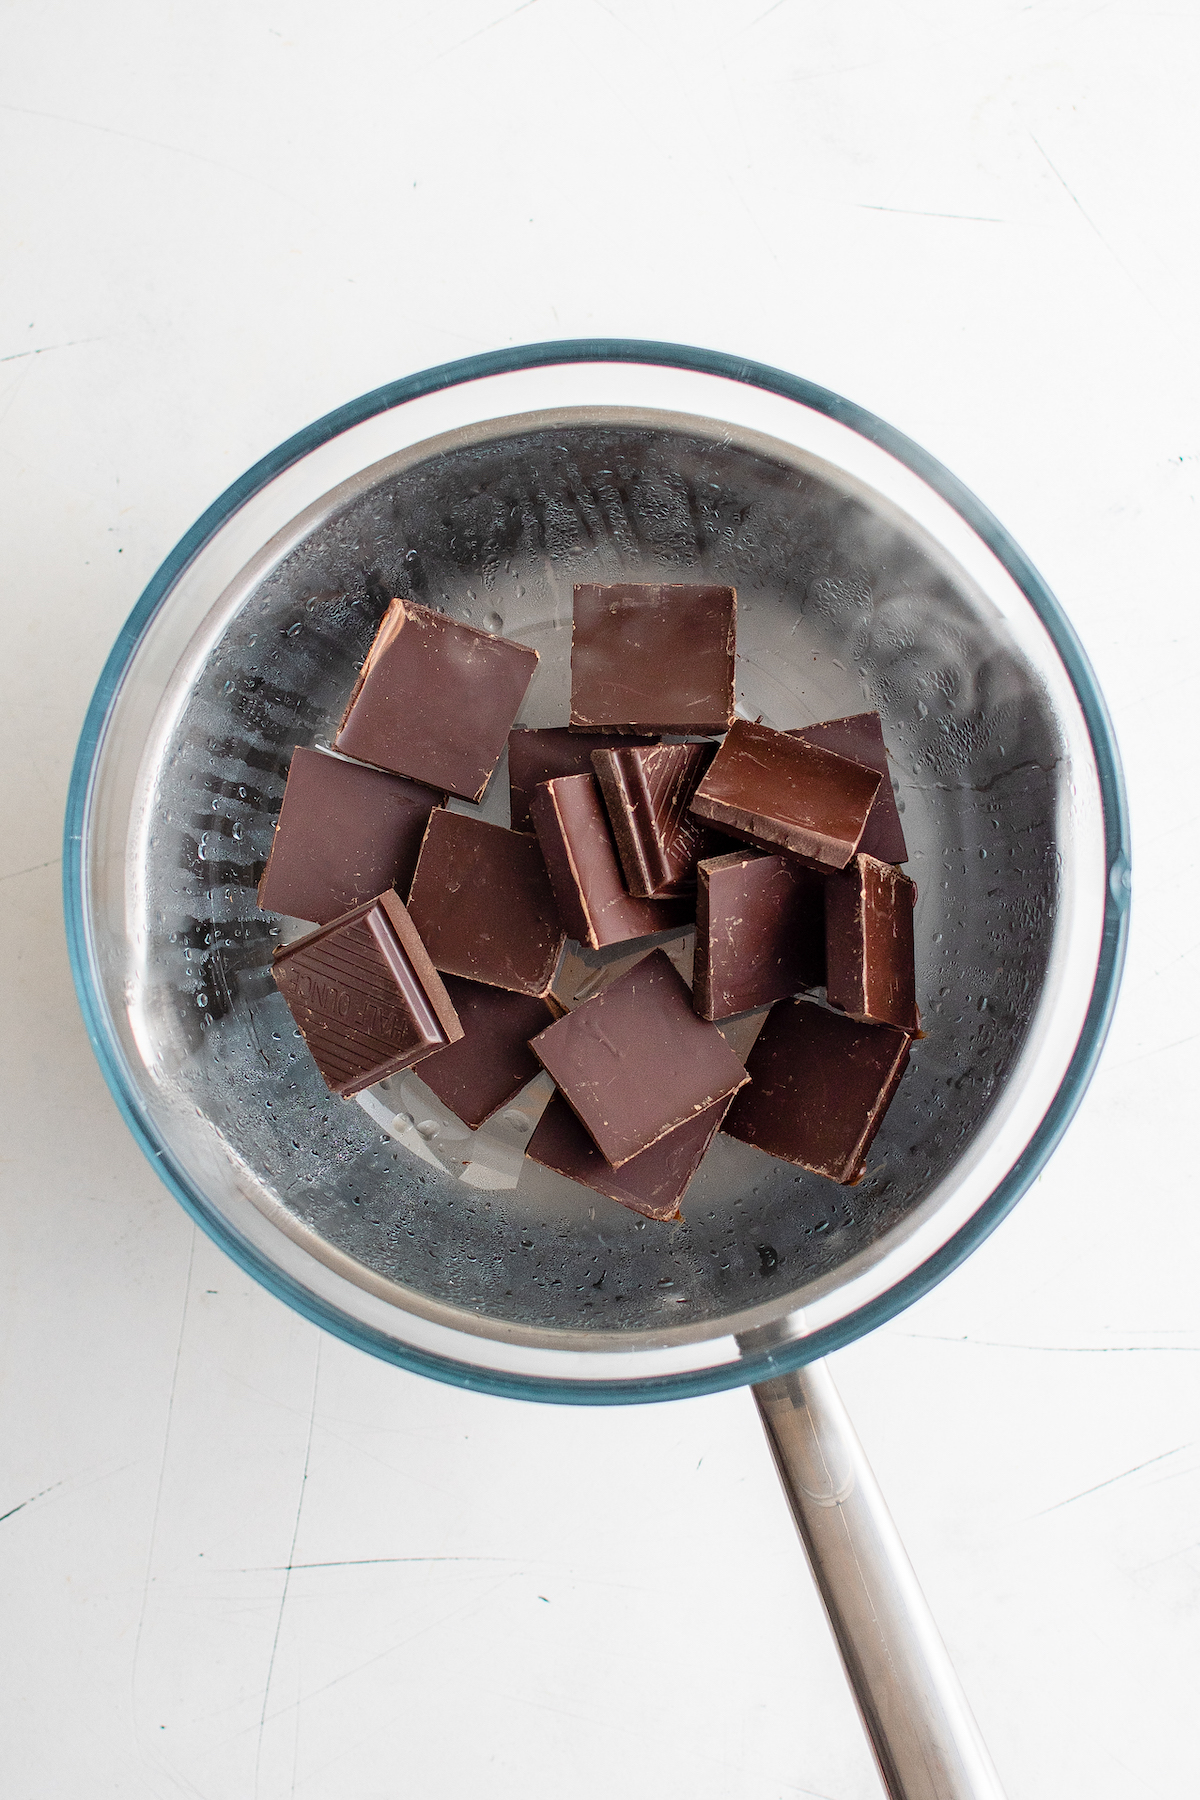 Chocolate in a heatproof bowl over a pot of hot water.